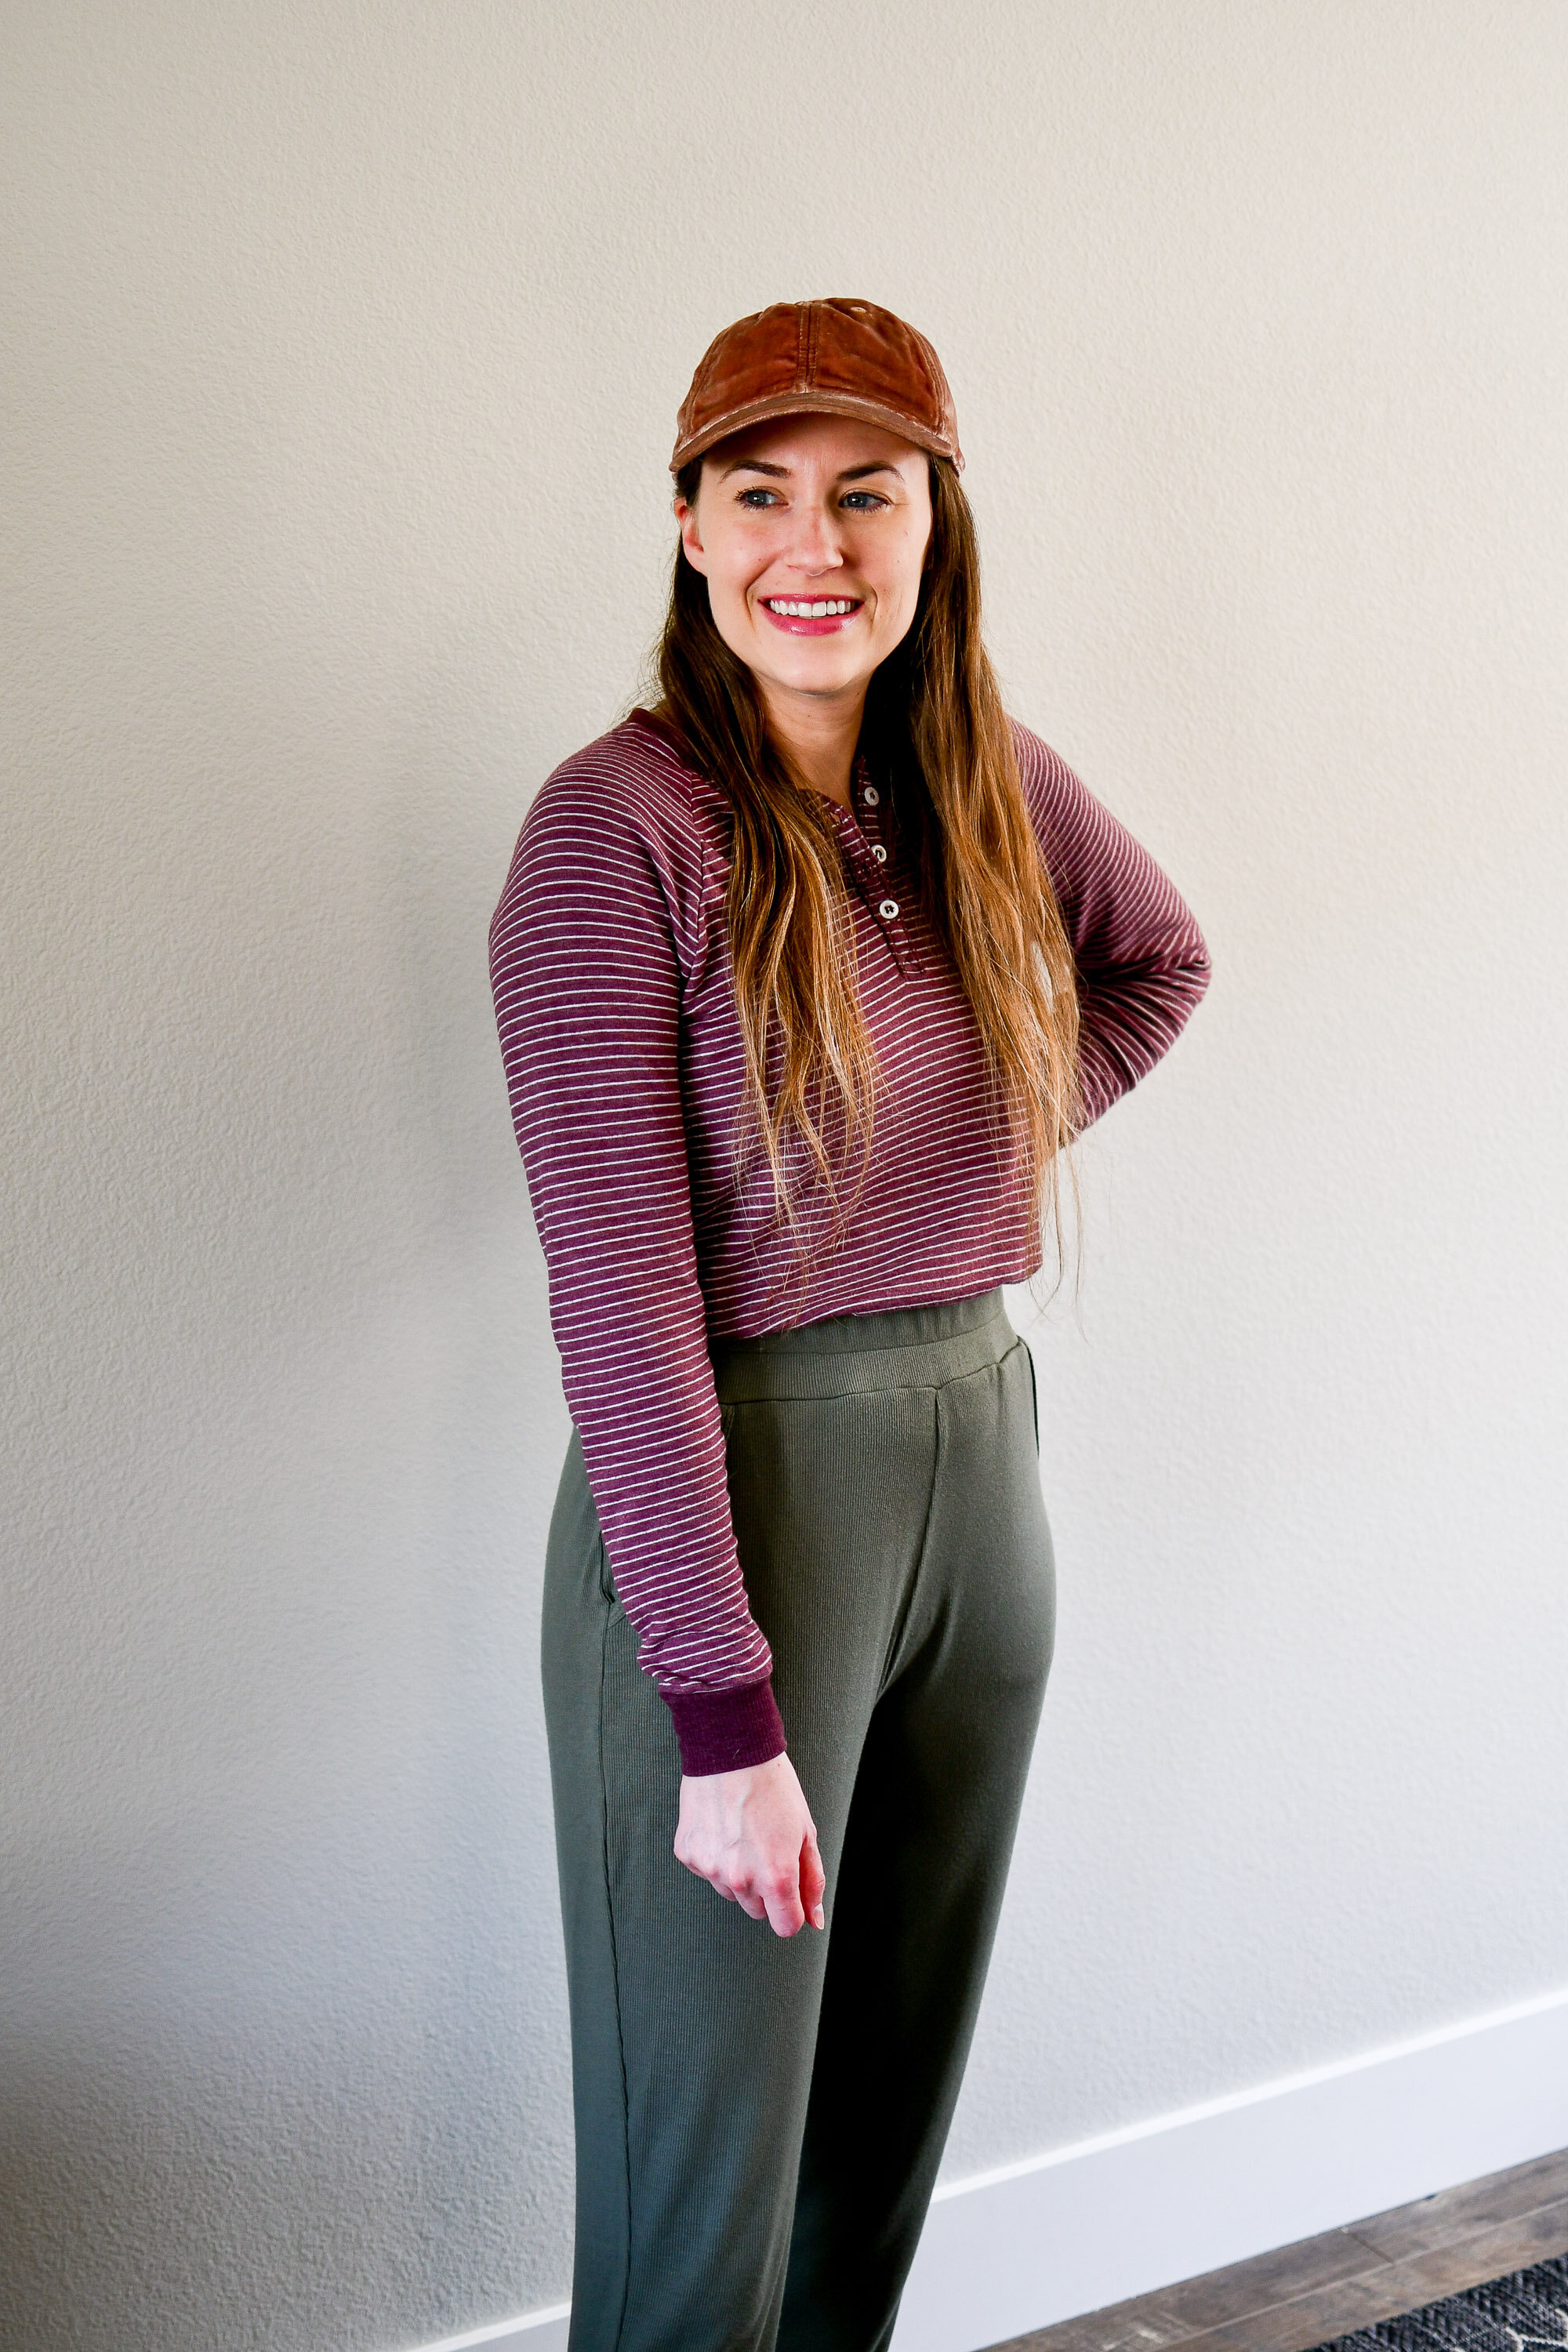 5 work from home outfit ideas with the Amour Vert Skylar joggers